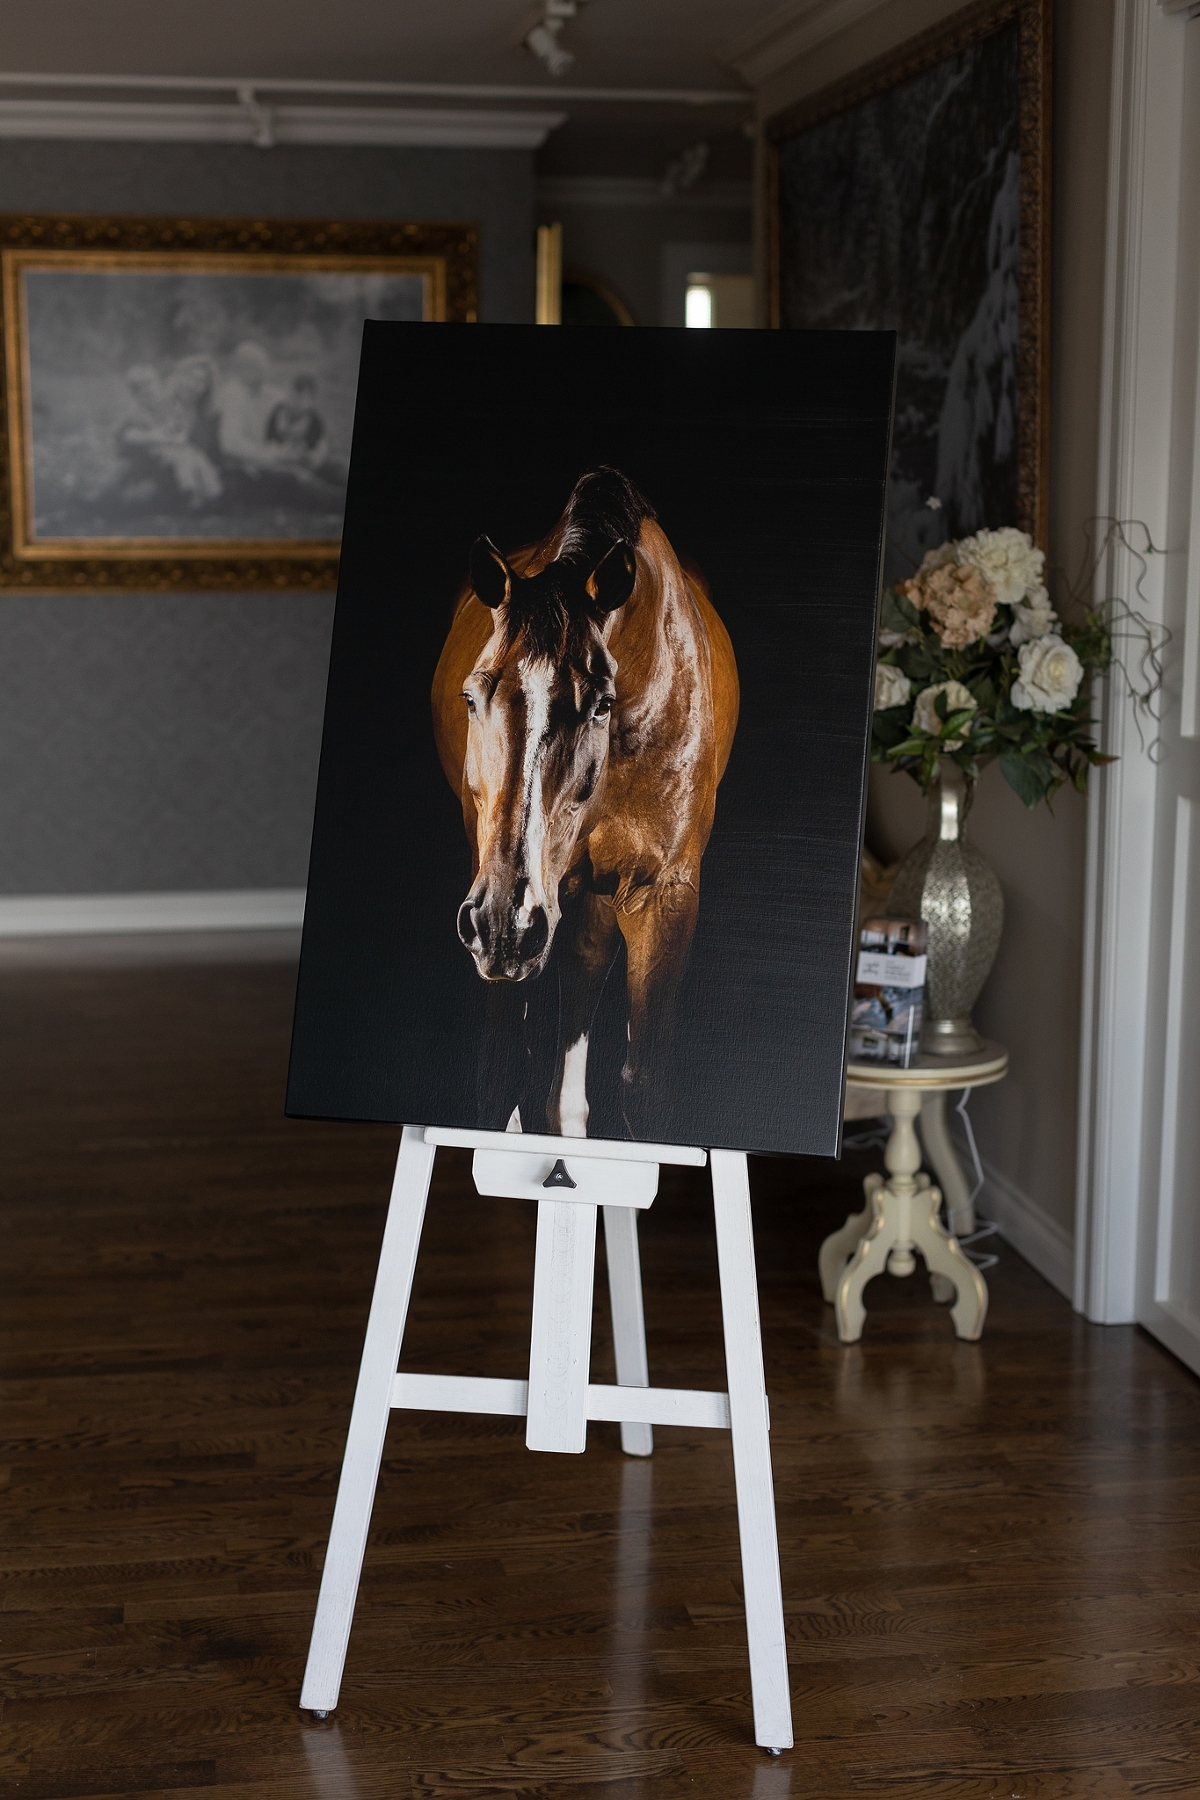 A painting of a horse displayed on a white easel in a room with elegant decor.